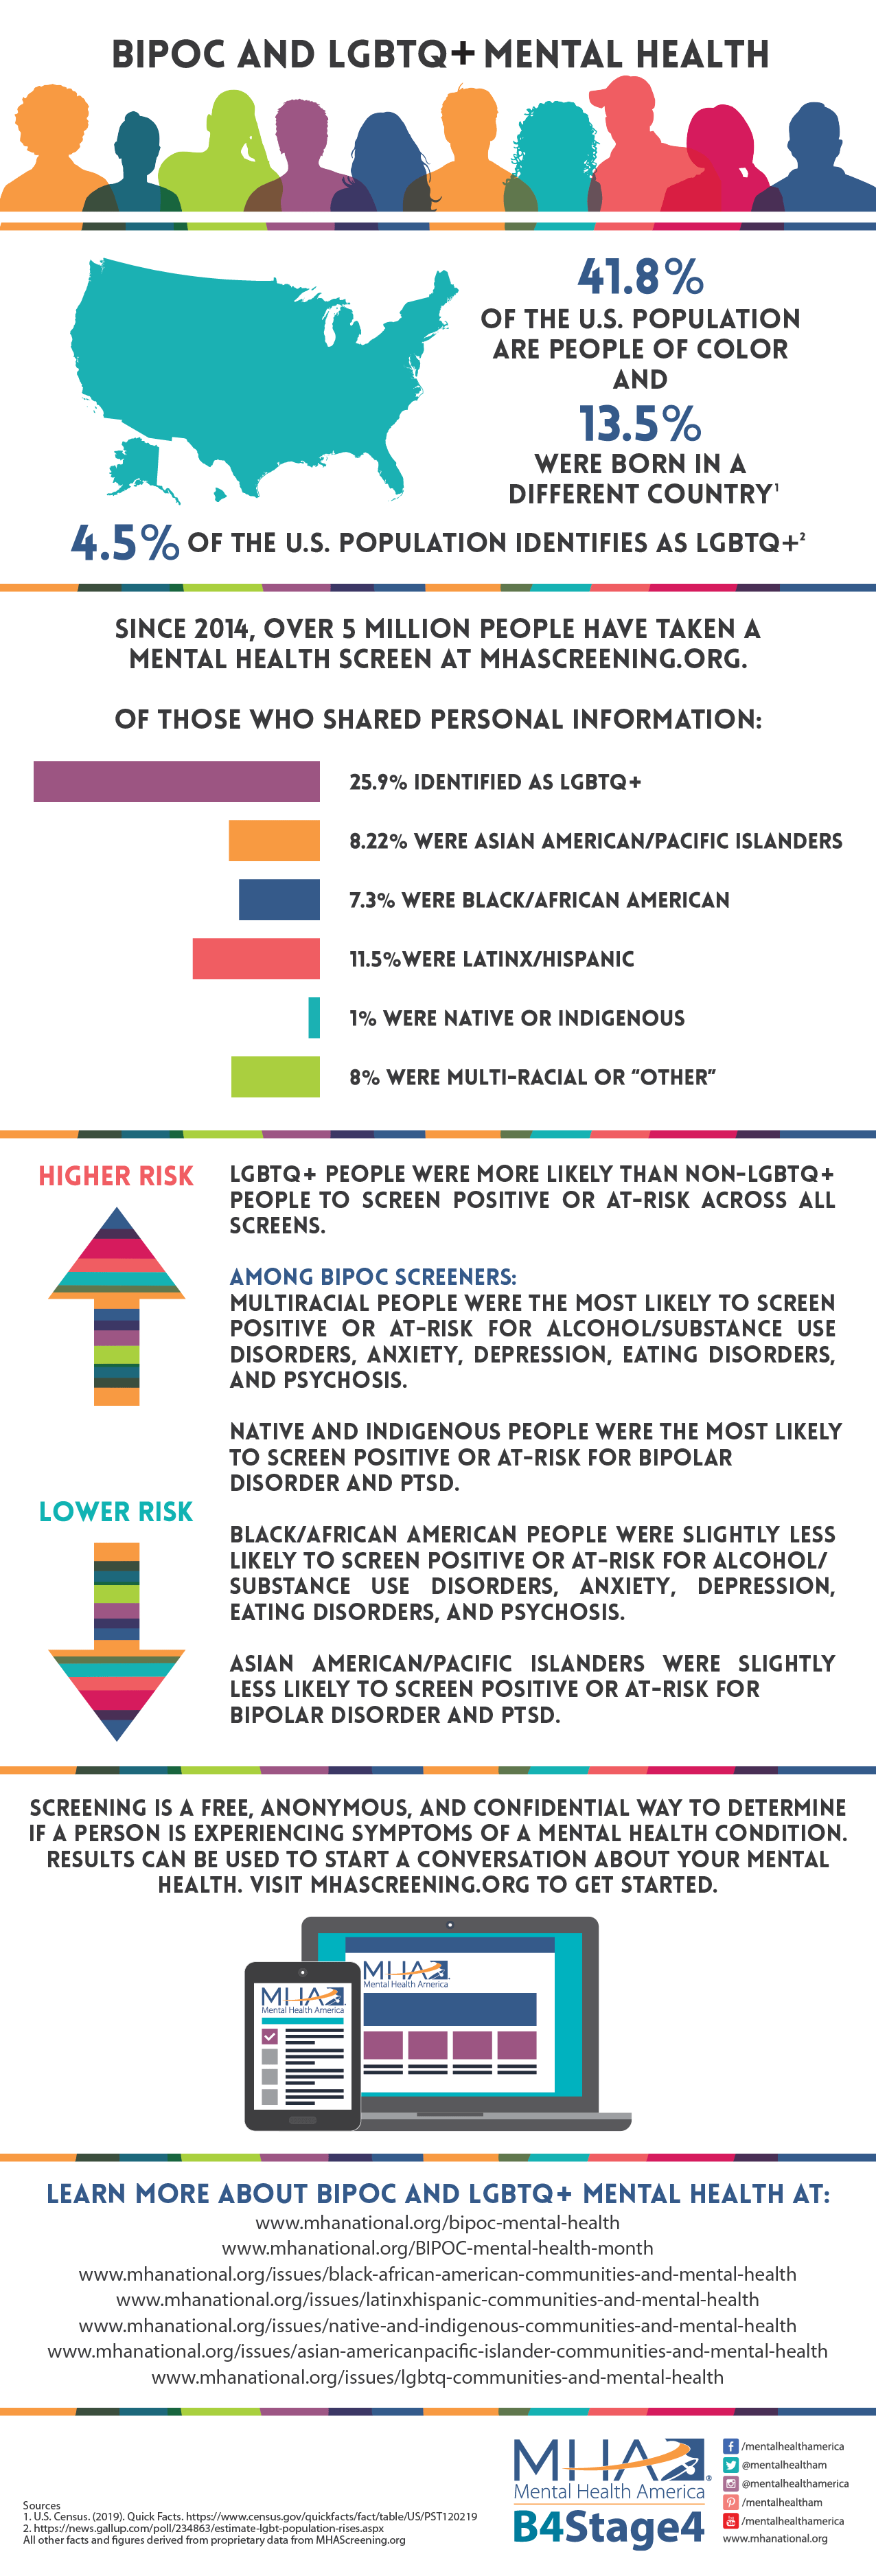 National Minority Mental Health Awareness Month – BIPOC MH Infographic Updated 6.29.20